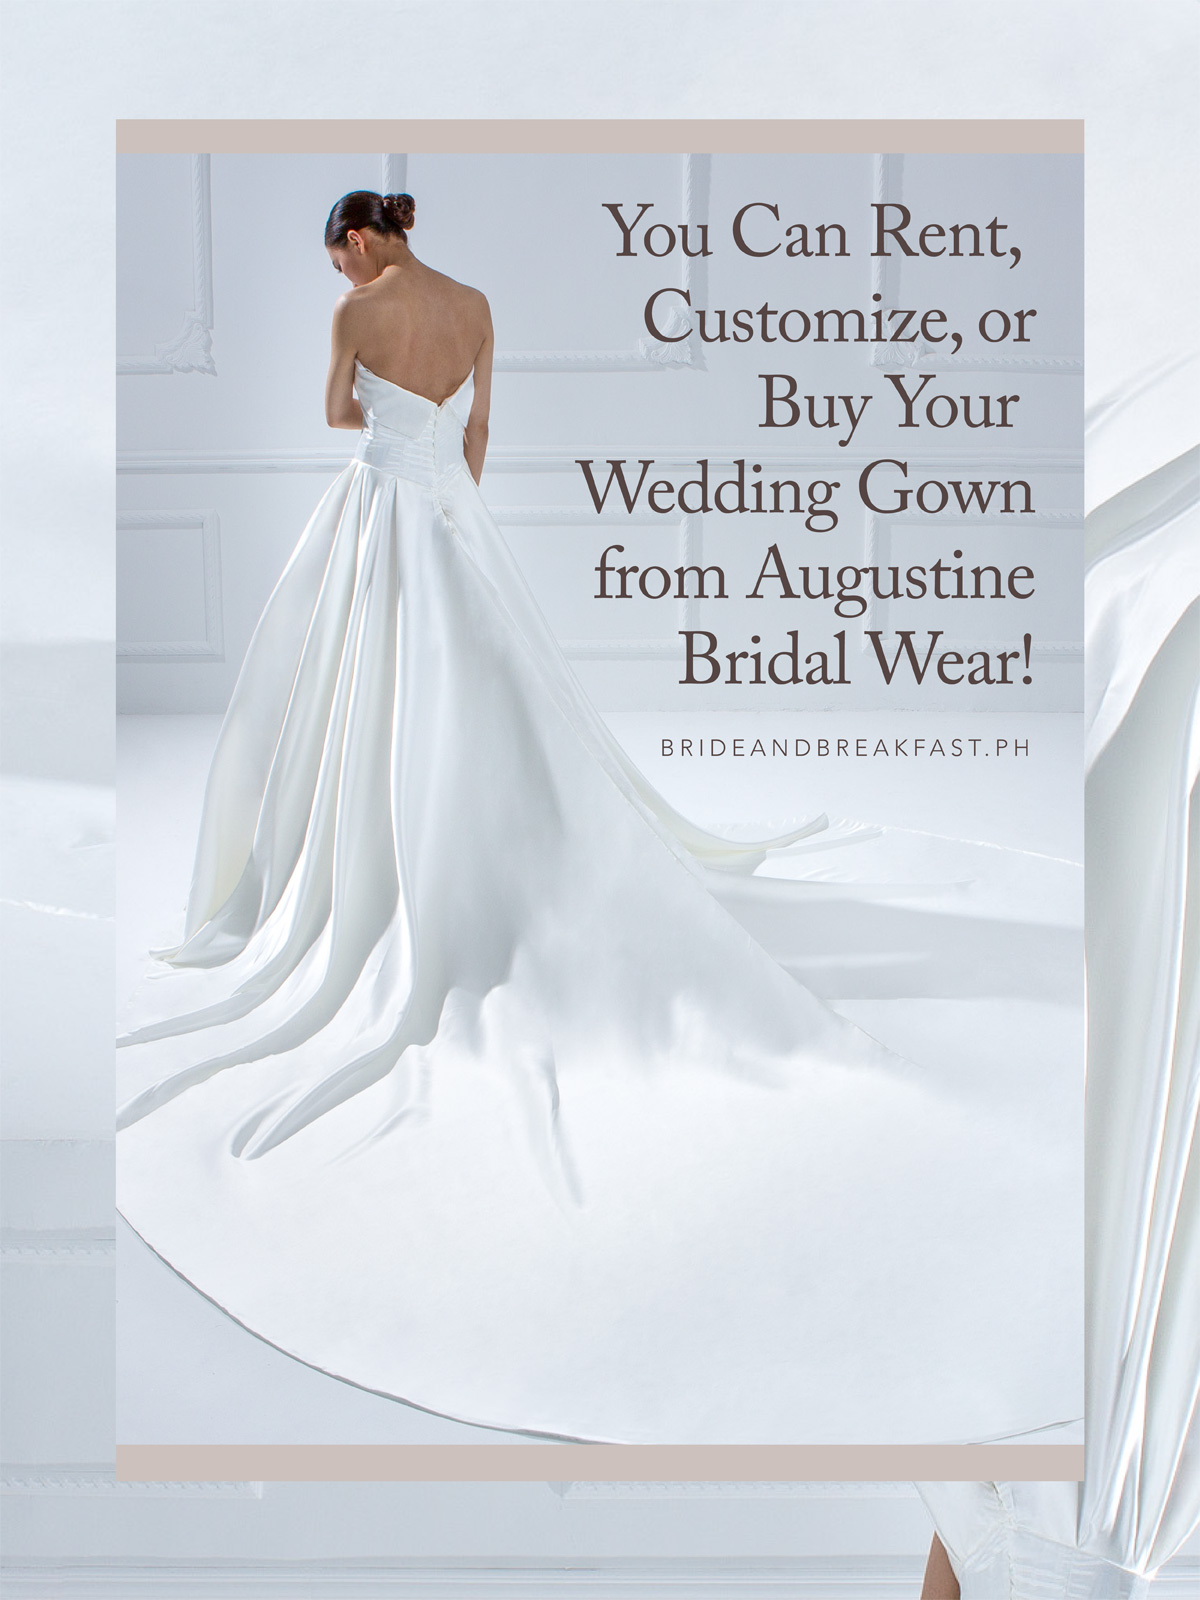 You Can Rent, Customize, or Buy Your Wedding Gown from Augustine Bridal Wear!